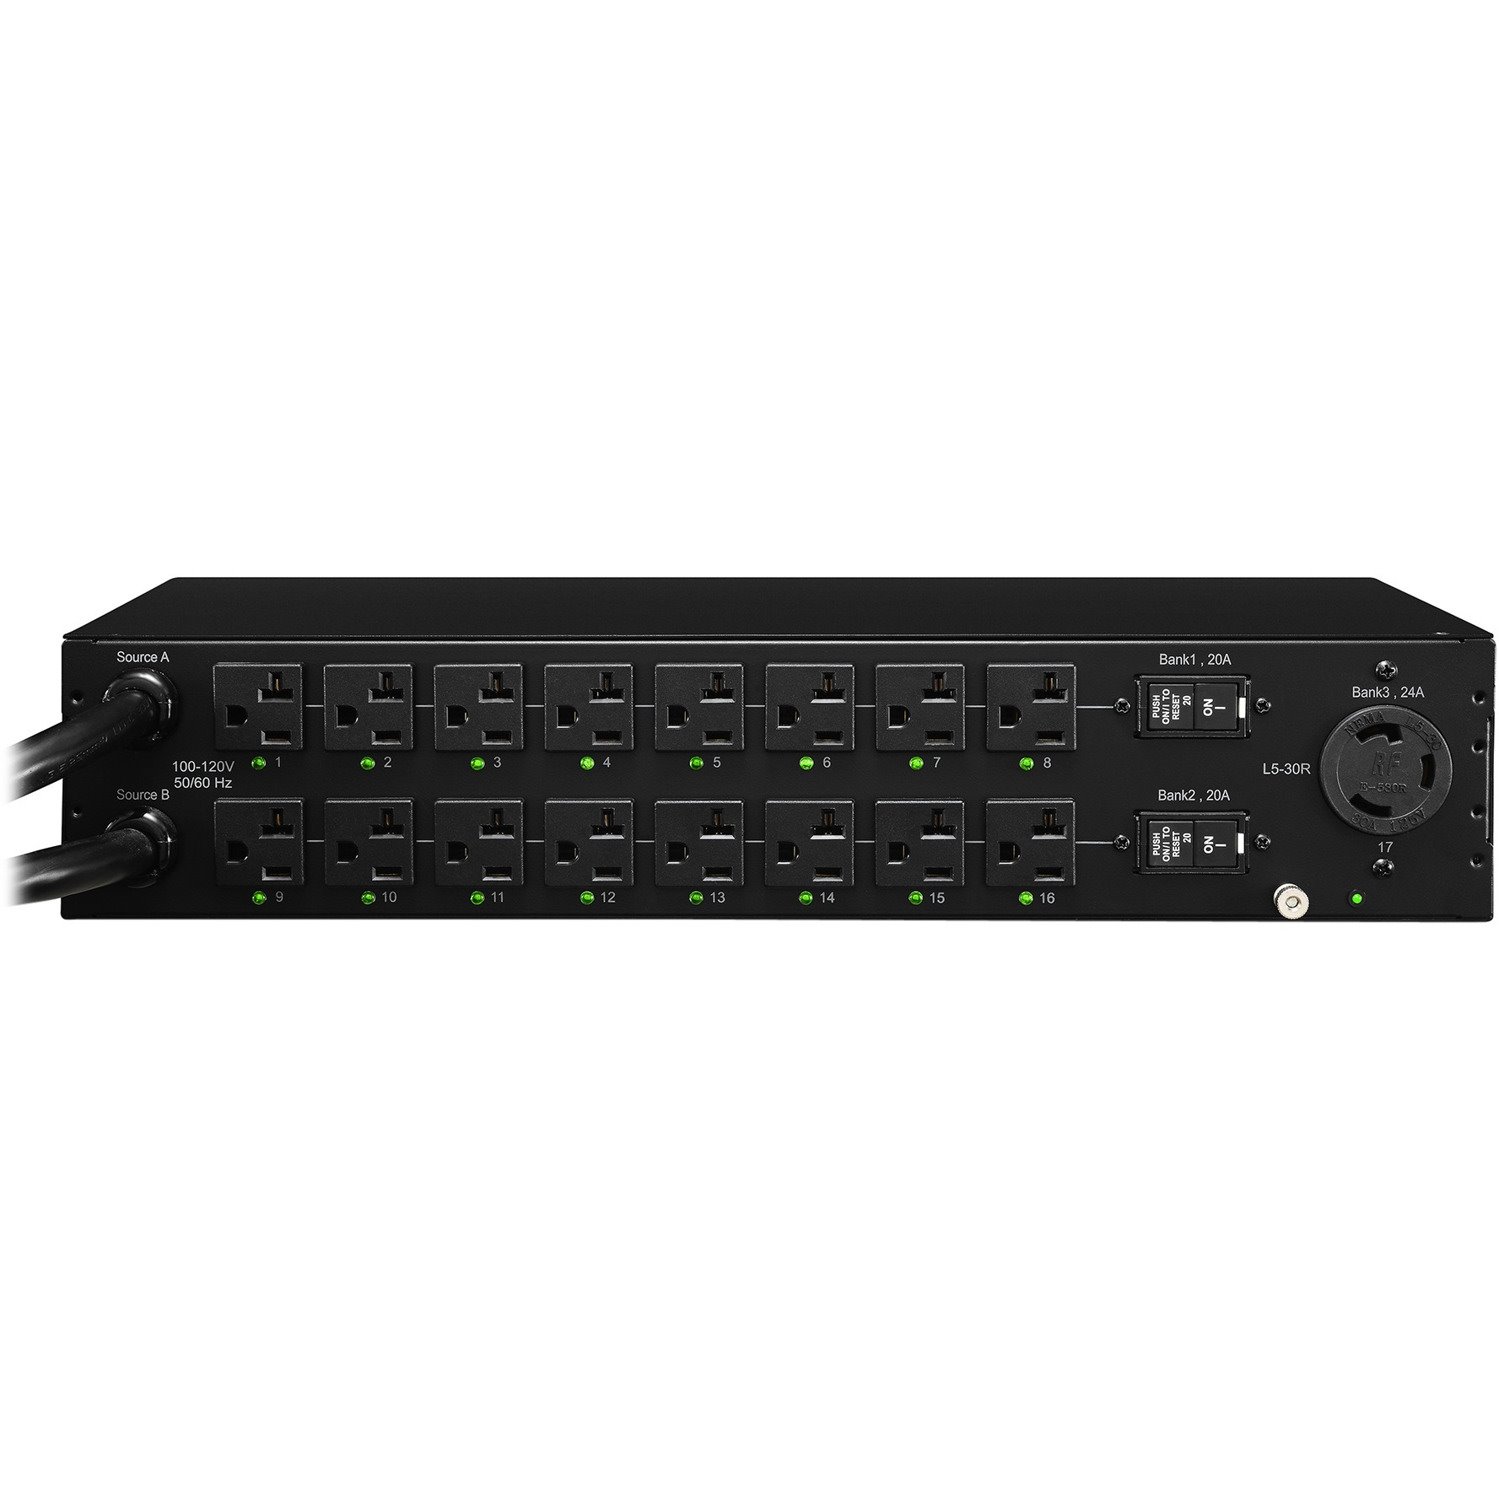 CyberPower PDU30SWT17ATNET 100 - 120 VAC 30A Switched ATS PDU